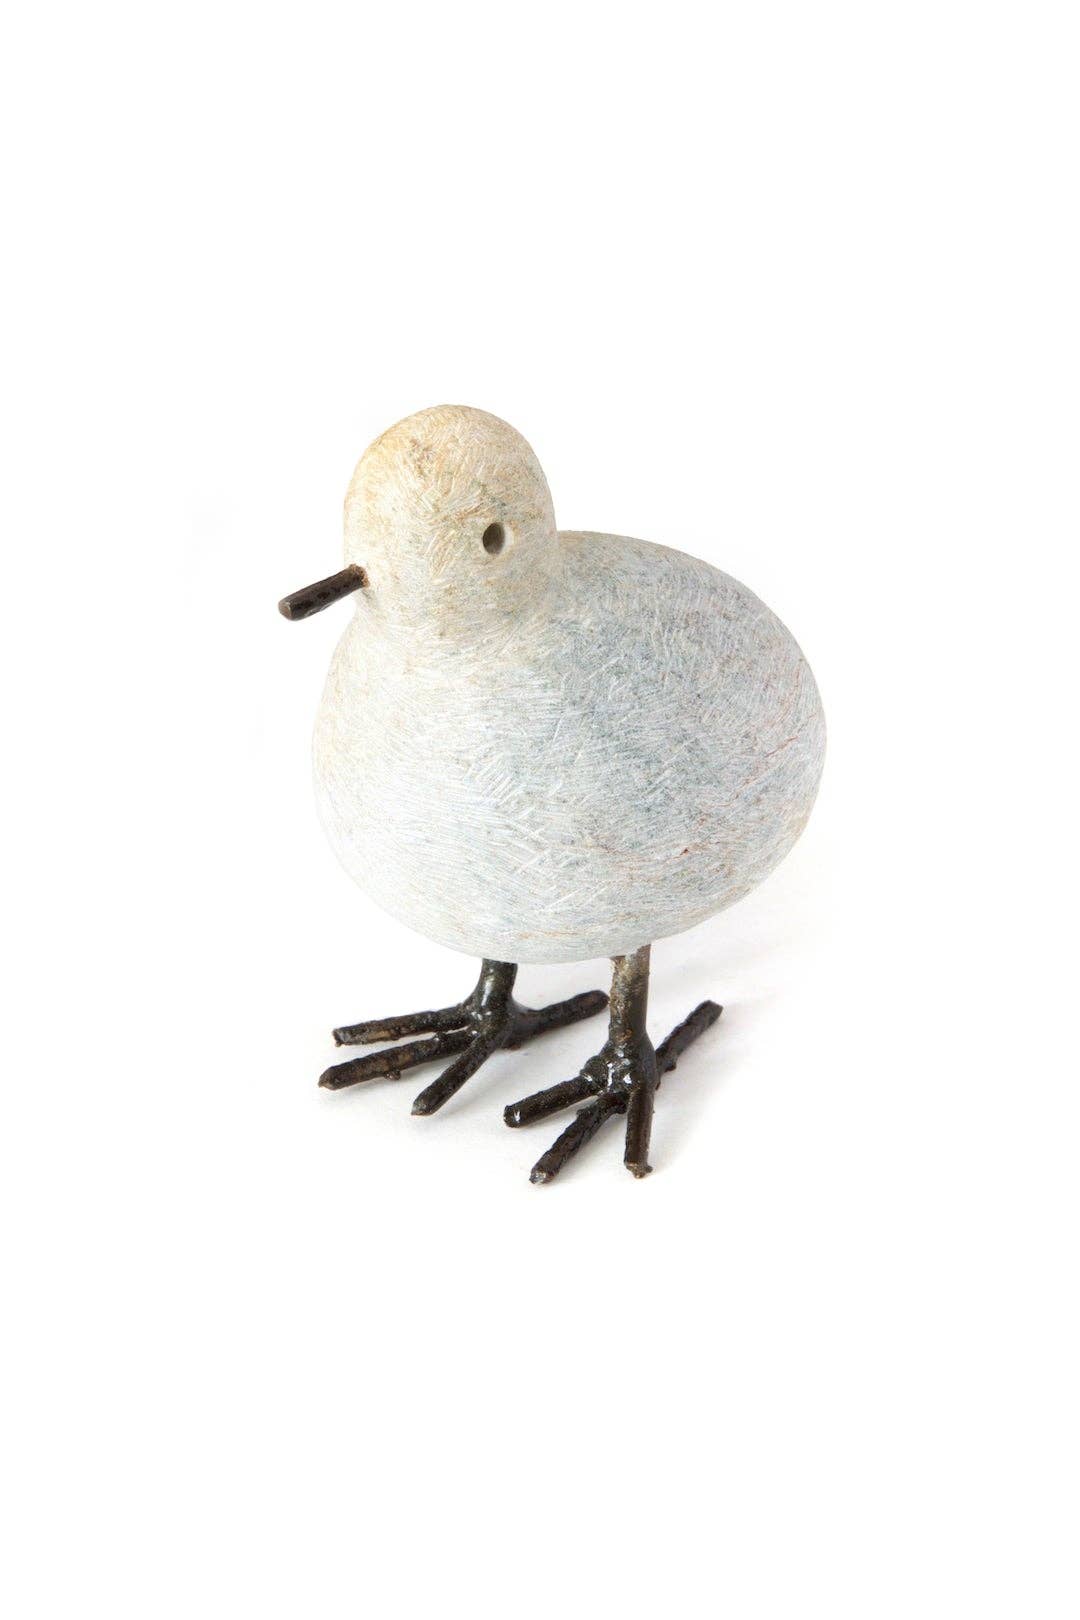 Tiny Stone and Recycled Metal Chickadee Bird Sculptures